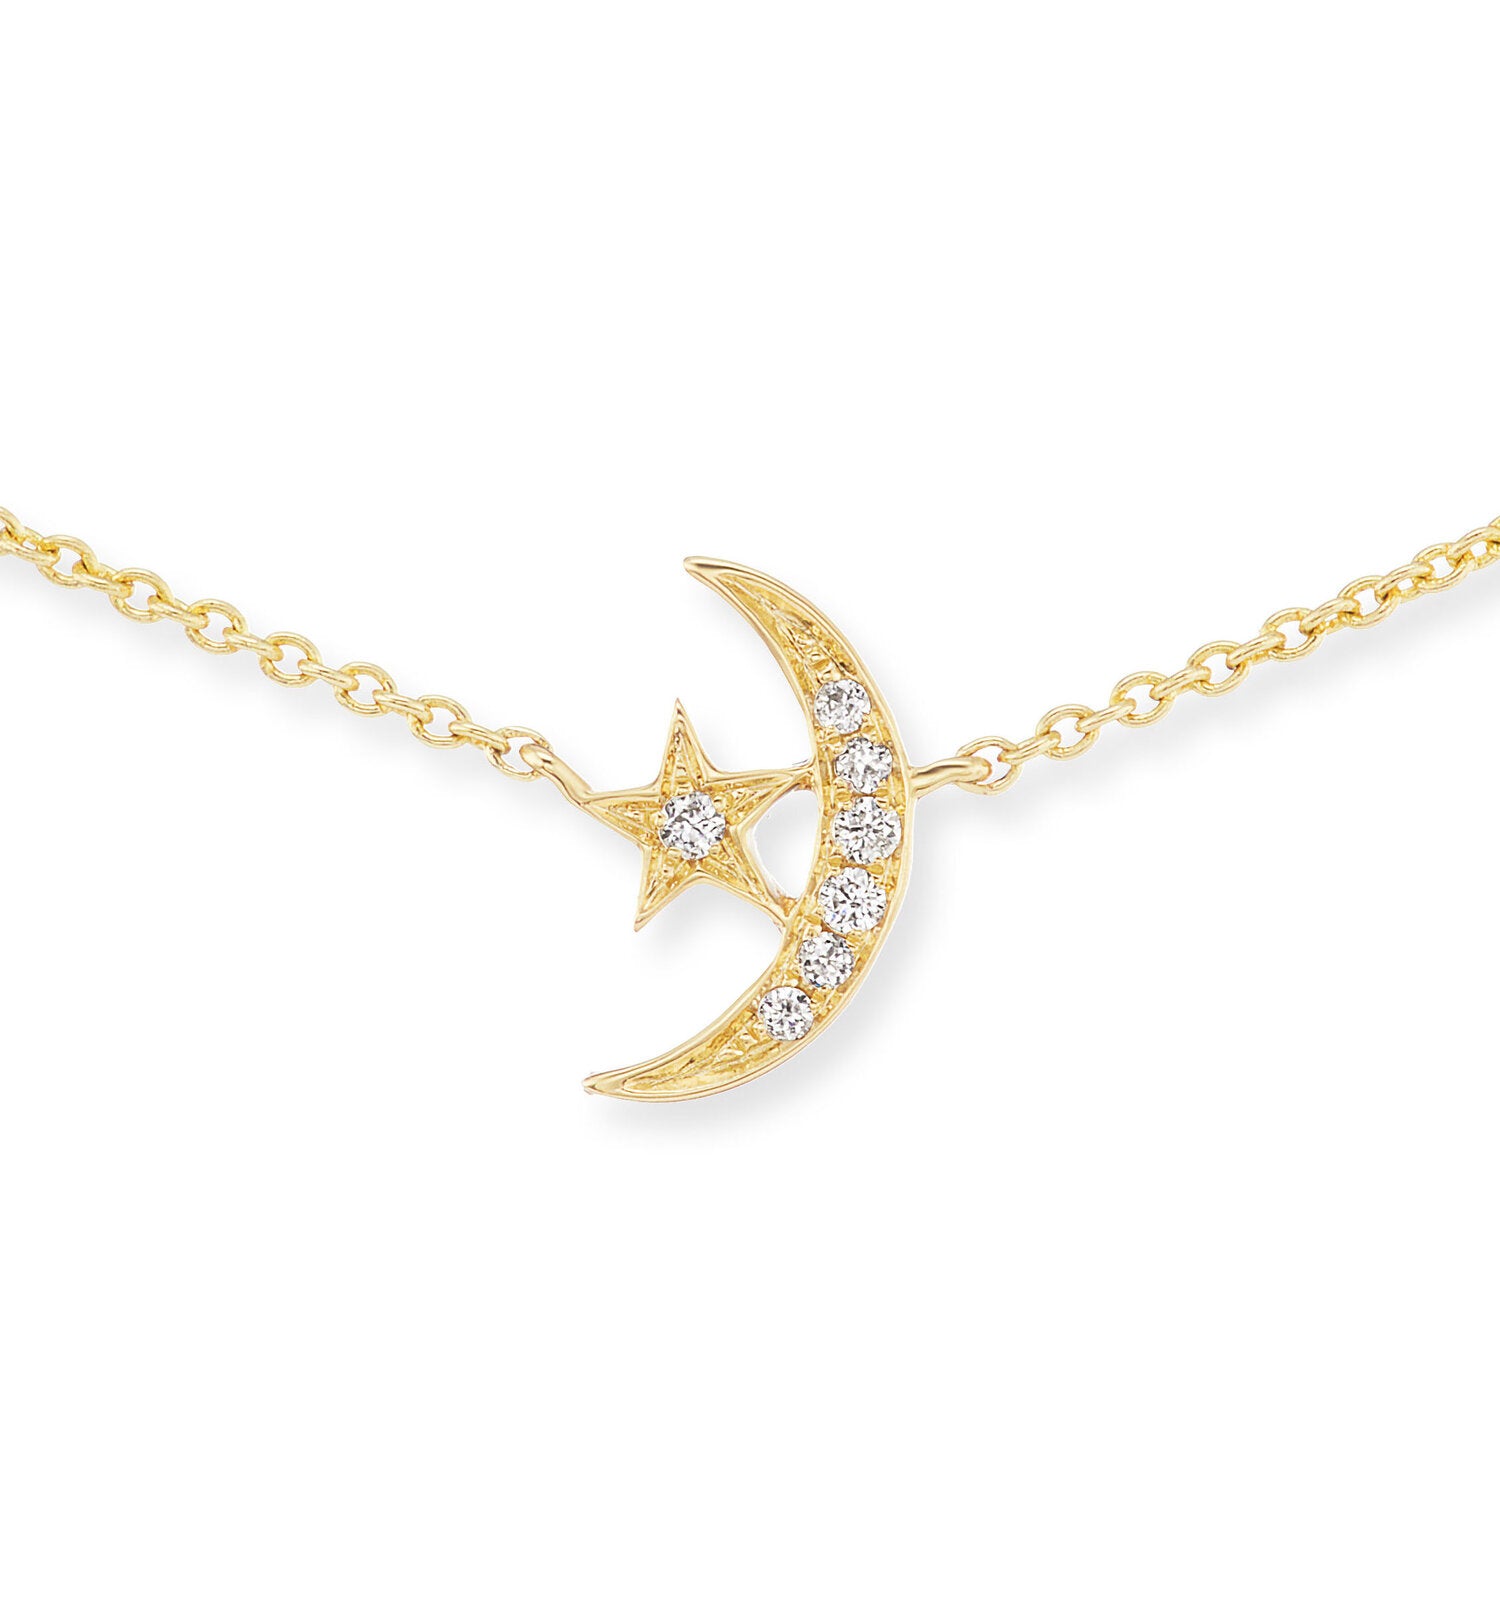 Karen Walker | Silver Moon and Star Charm Necklace | Silvermoon Jewellers